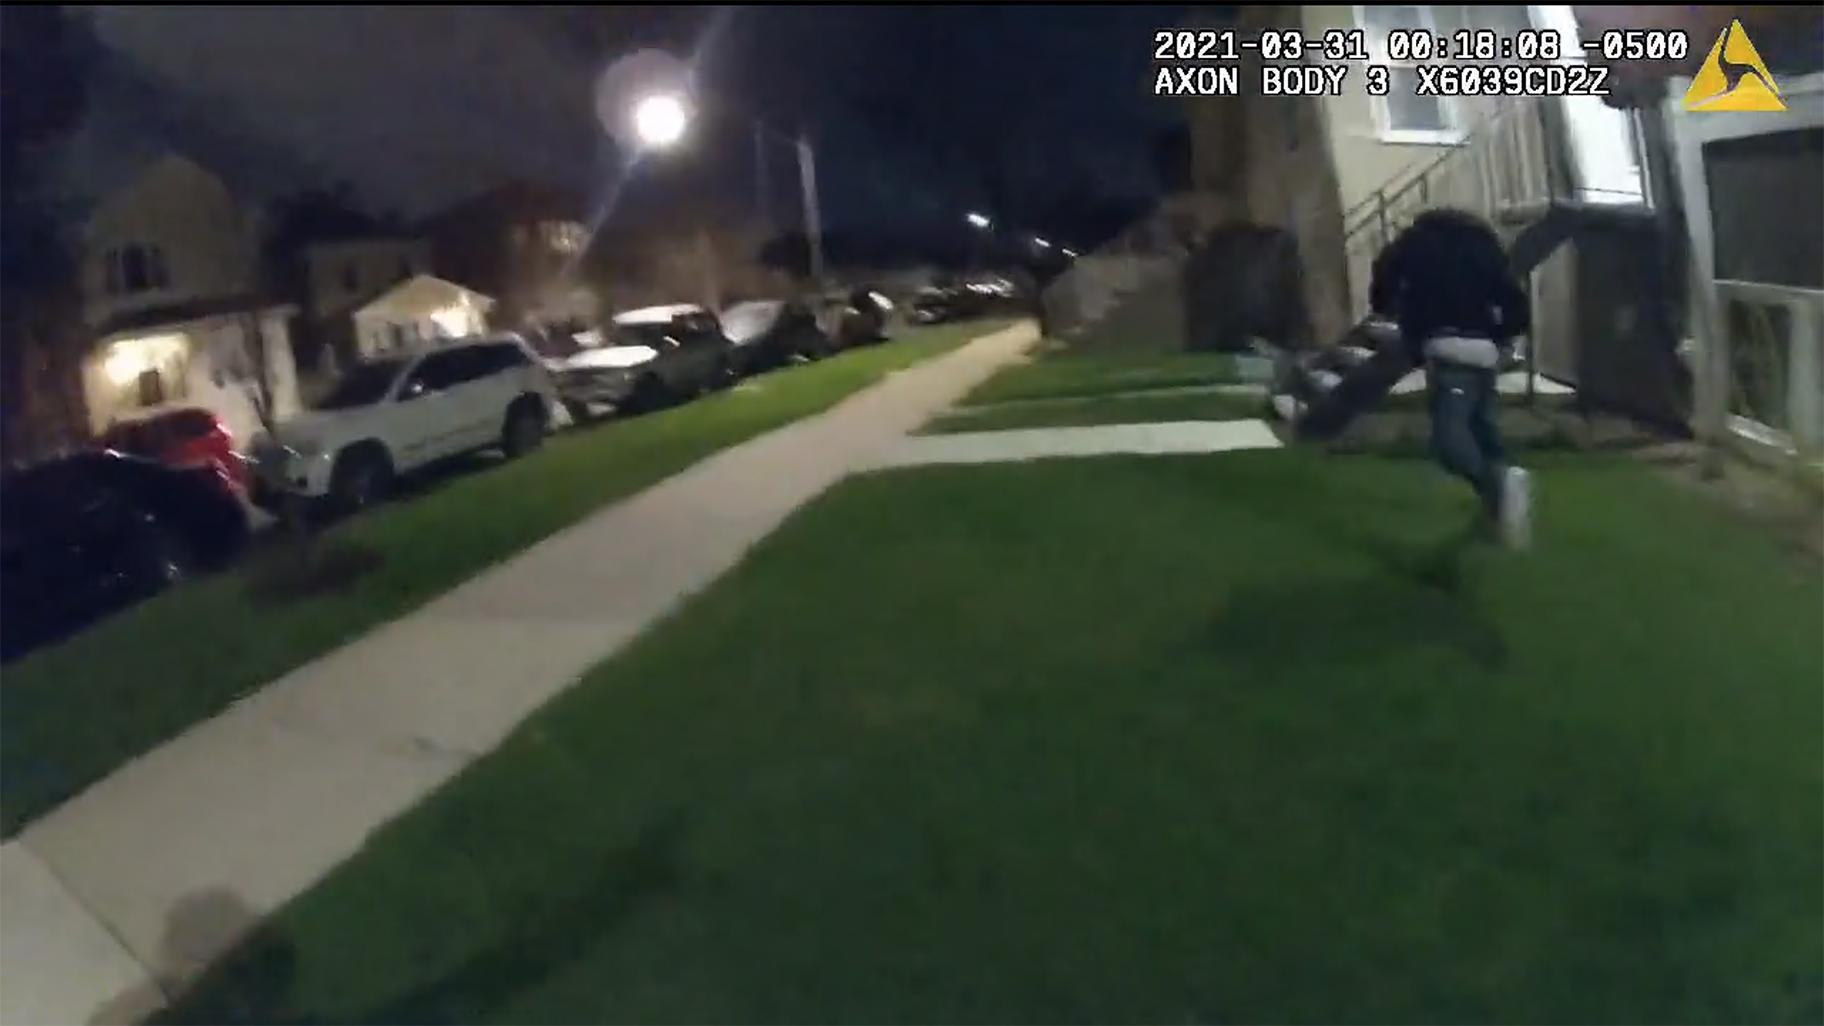 An image from body camera video released April 28 by the Civilian Office of Police Accountability shows Anthony Alvarez, 22, in the moments before he was shot by a Chicago police officer March 31, 2021. (WTTW News via COPA)